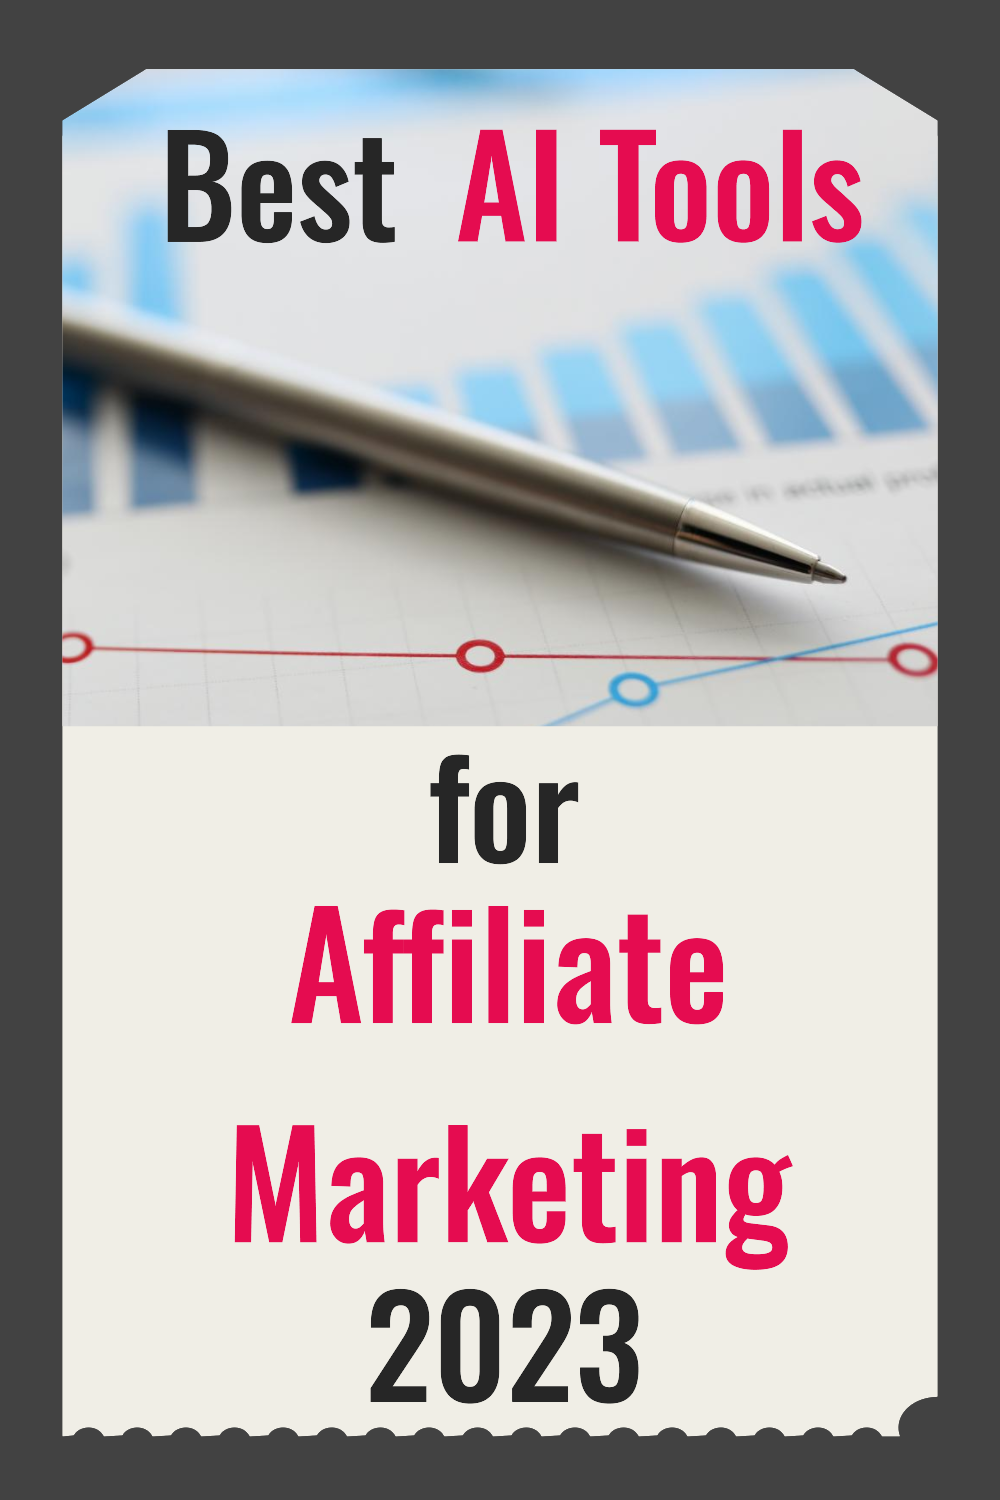 Best AI tools for affiliate marketing 2023